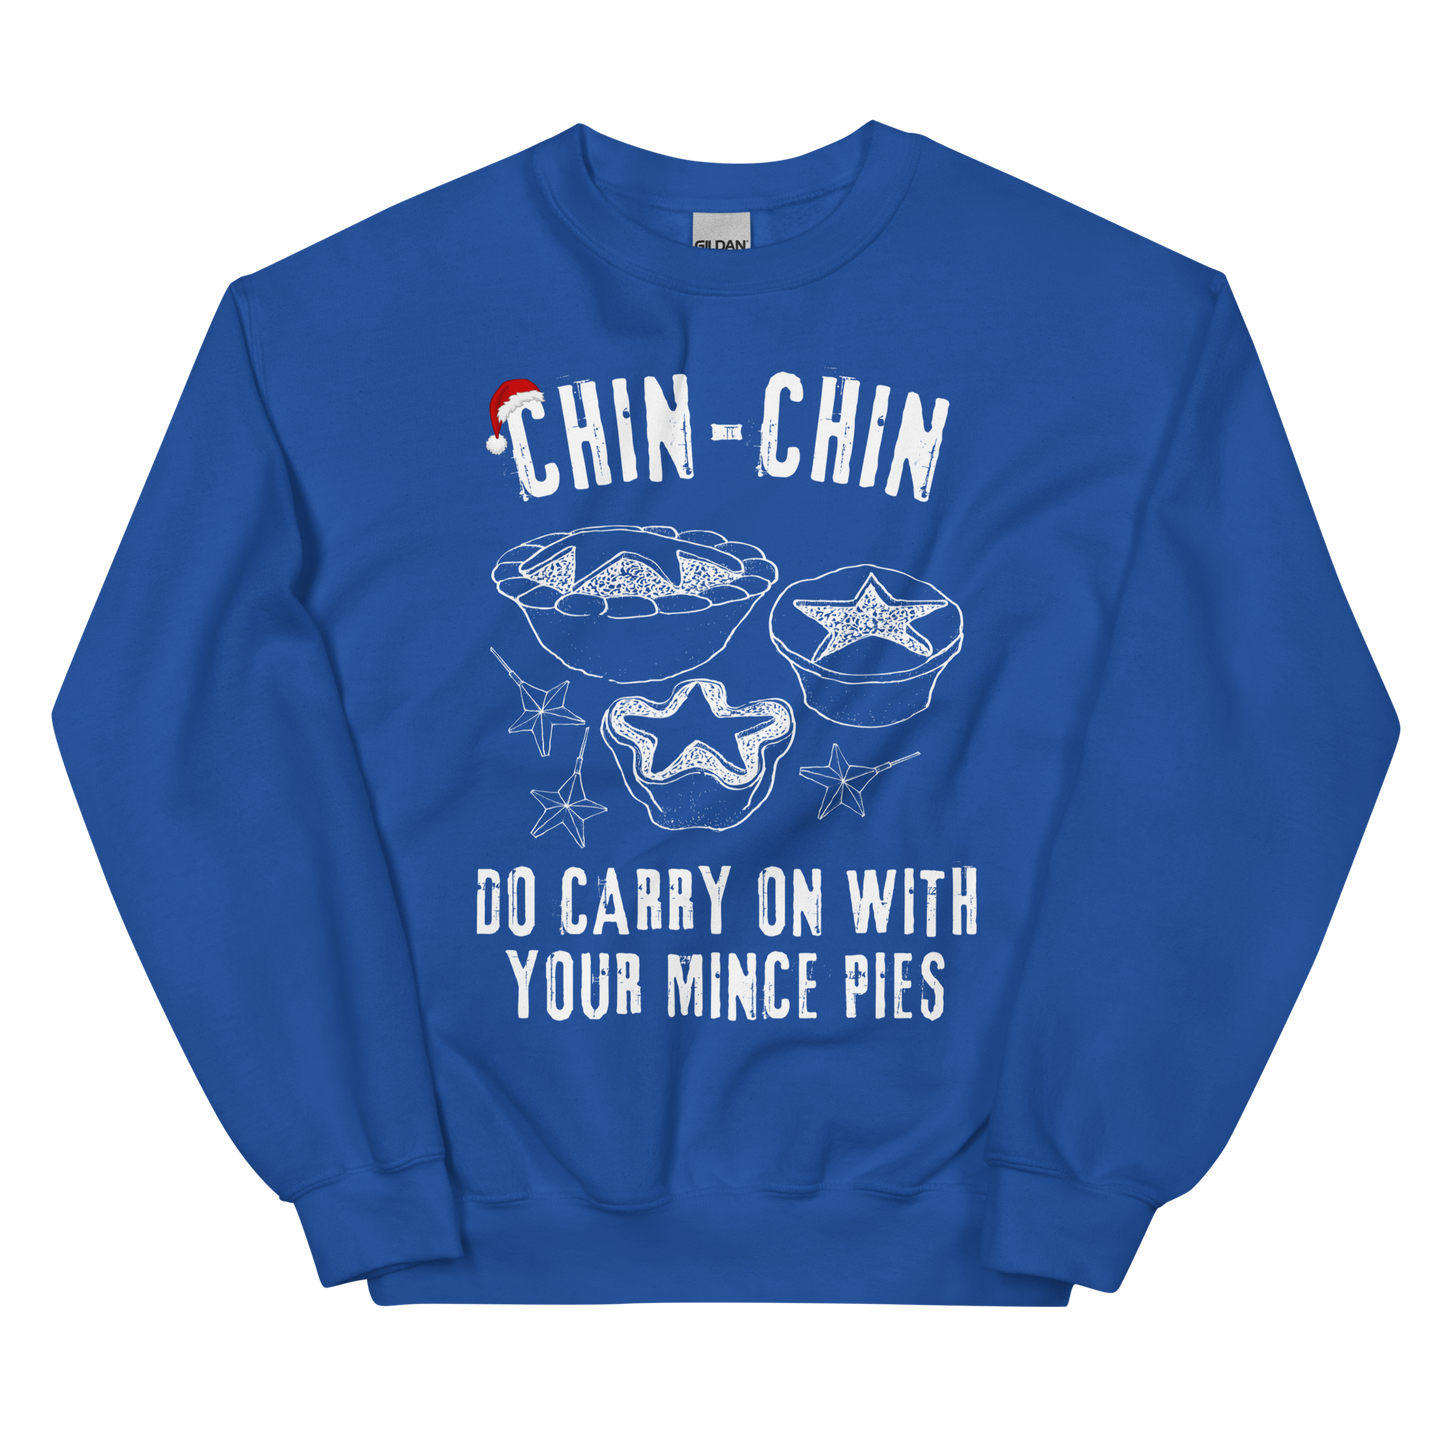 Chin-Chin, Do Carry on With Your Mince Pies (Festive Sweatshirt)